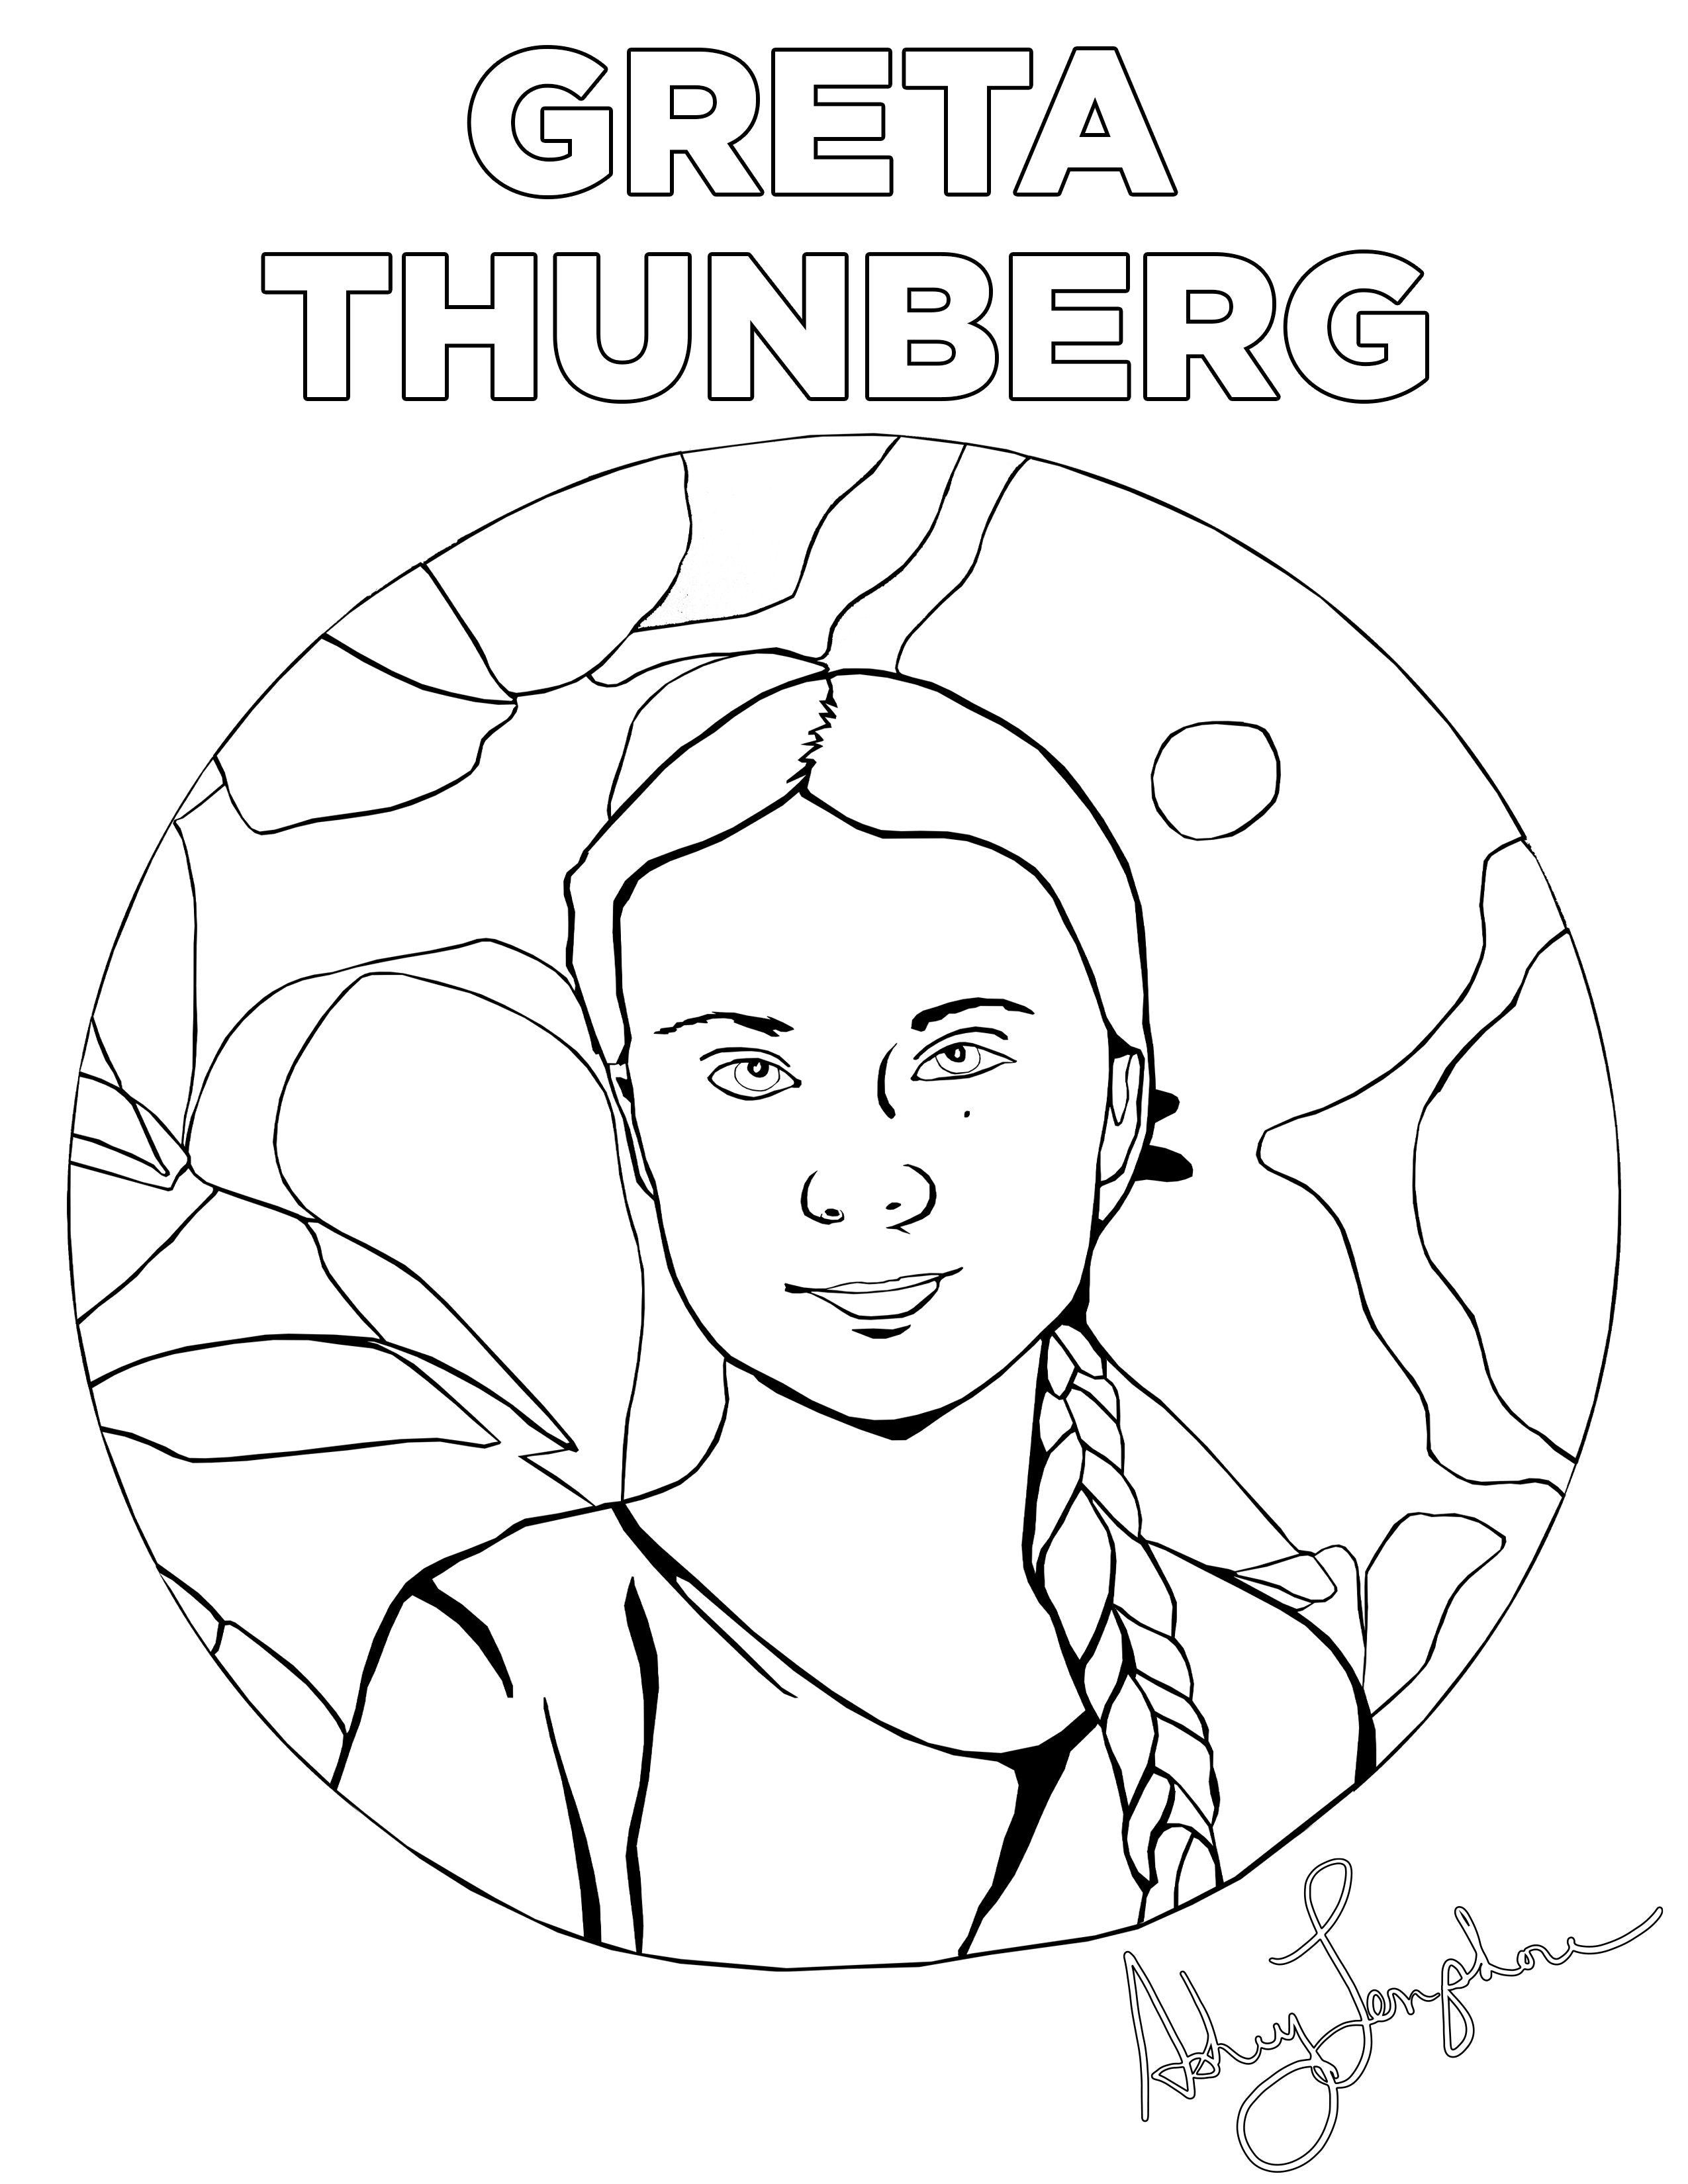 Ashley Longshore coloring pages featuring Greta Thunberg.